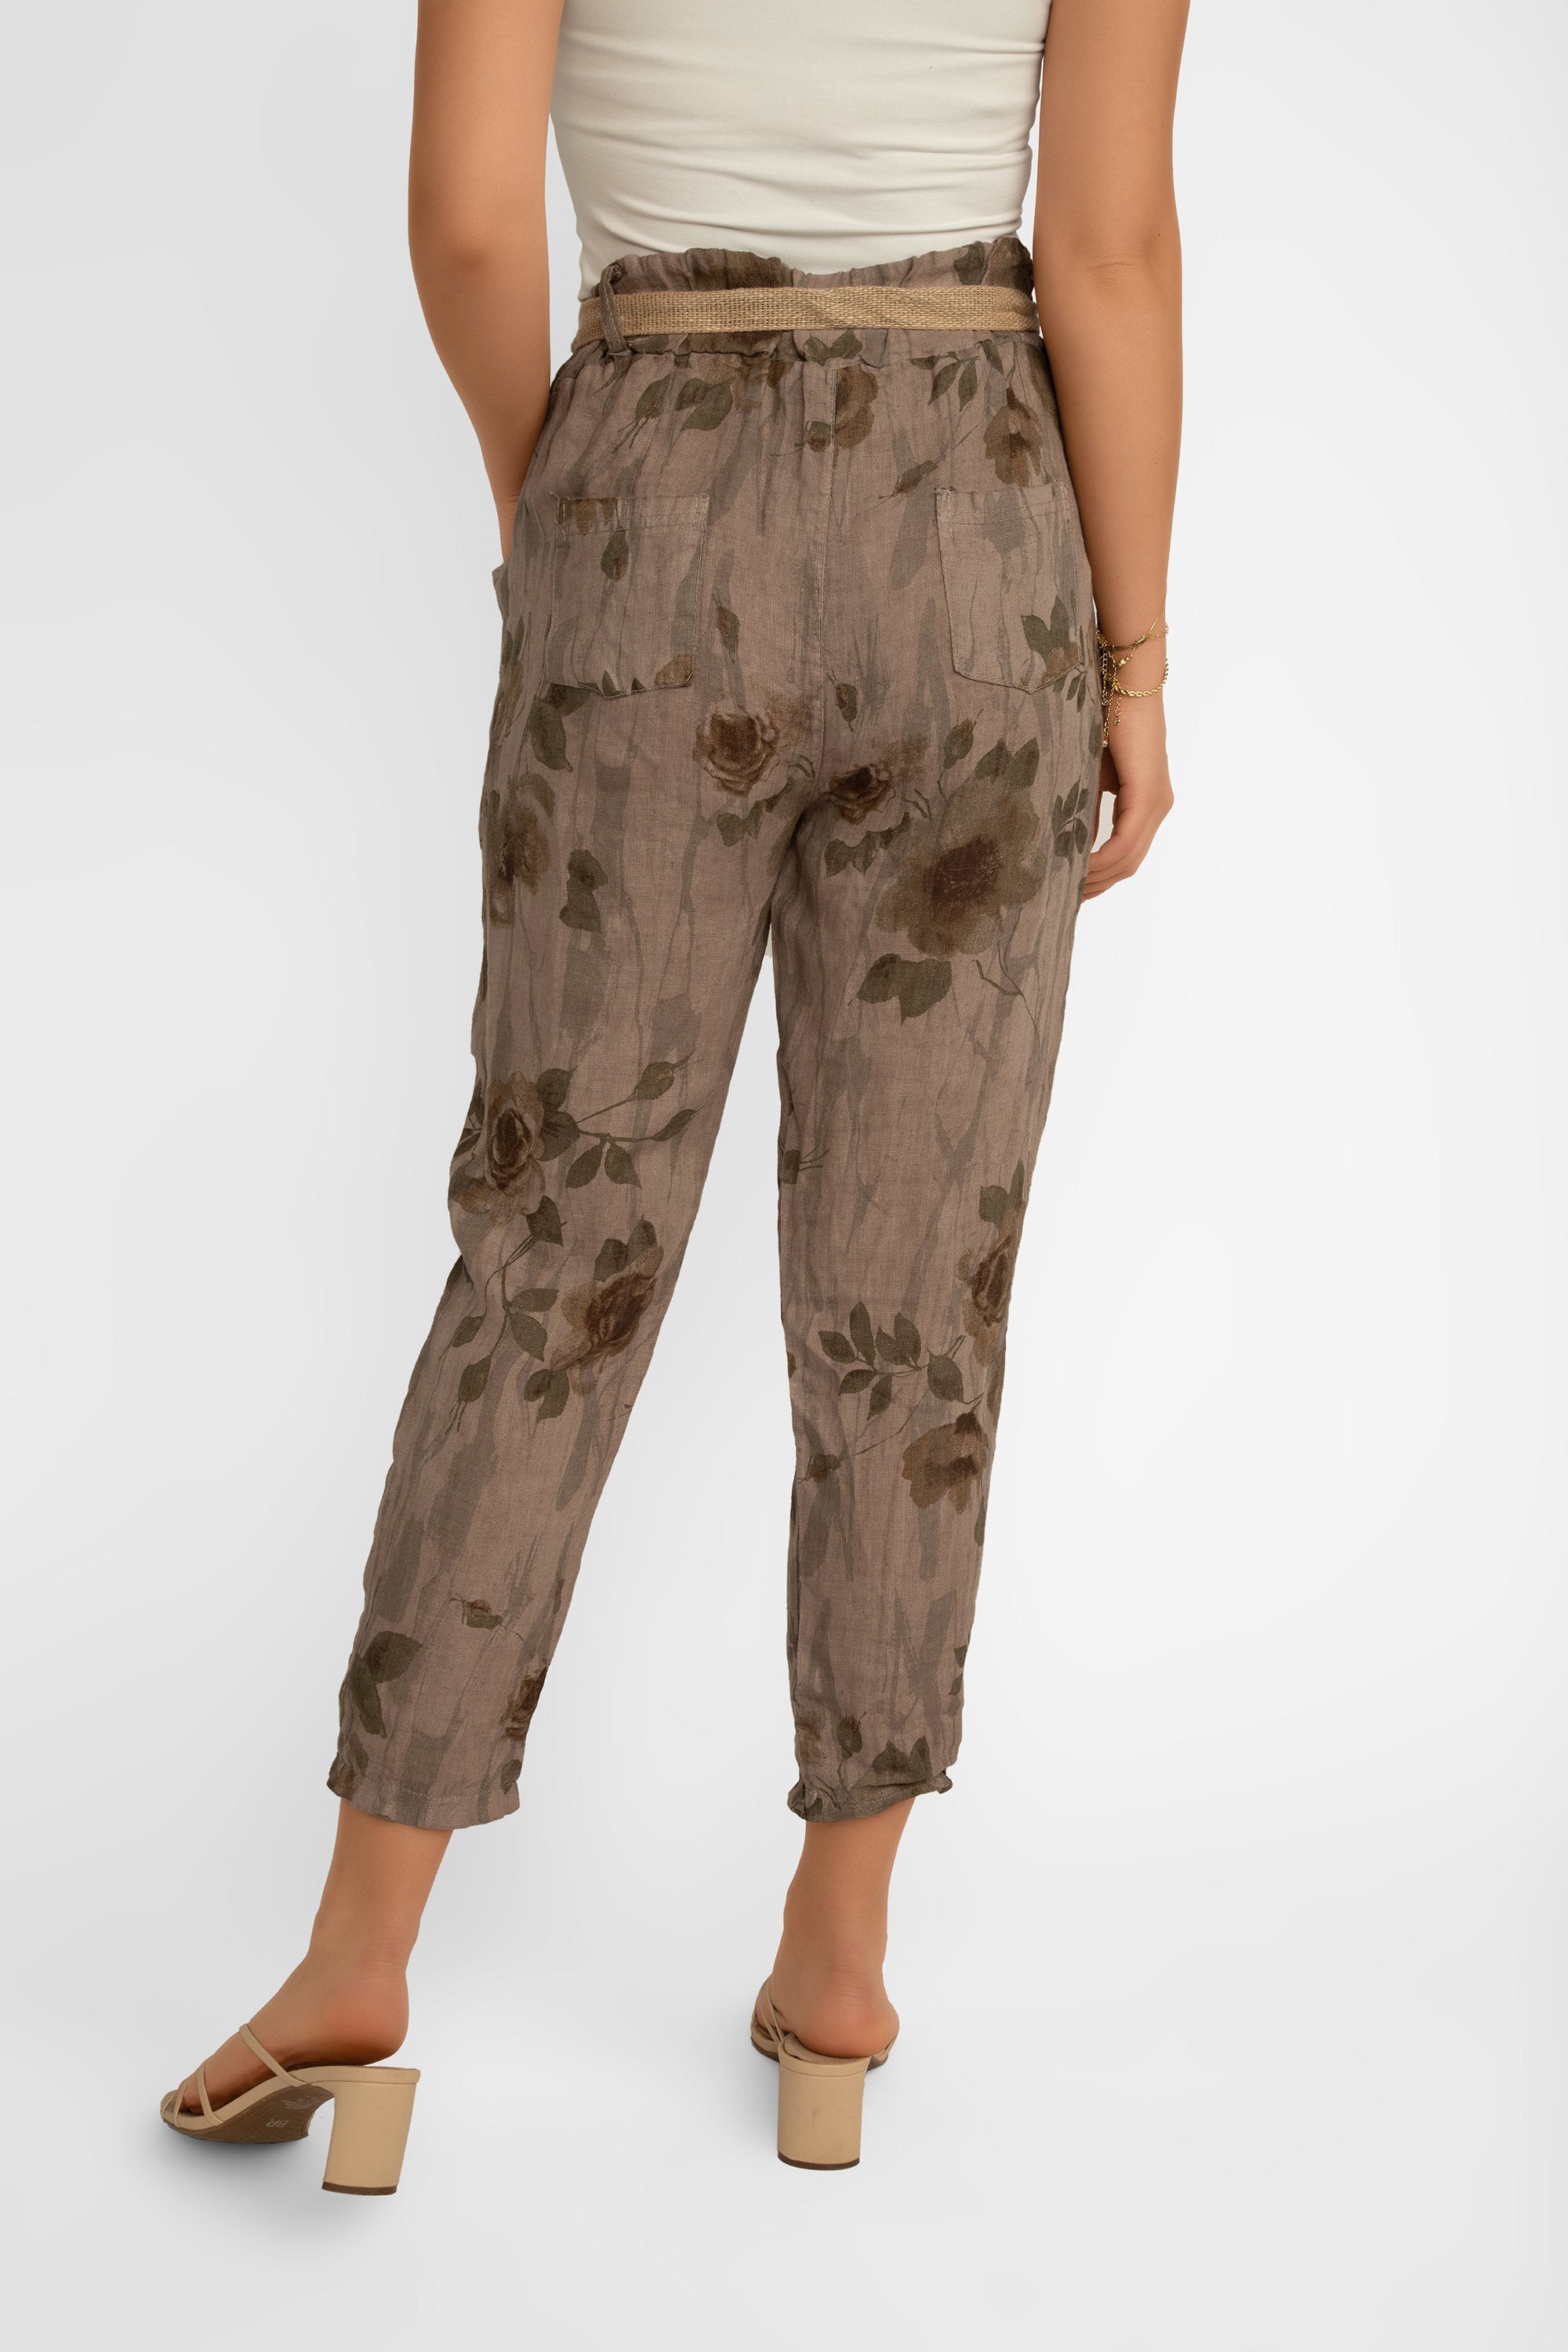 Back view showing back pockets on Elissia (CM20847) Women's Slim Fit Cropped Floral Print Linen Pants With Belt in Brown